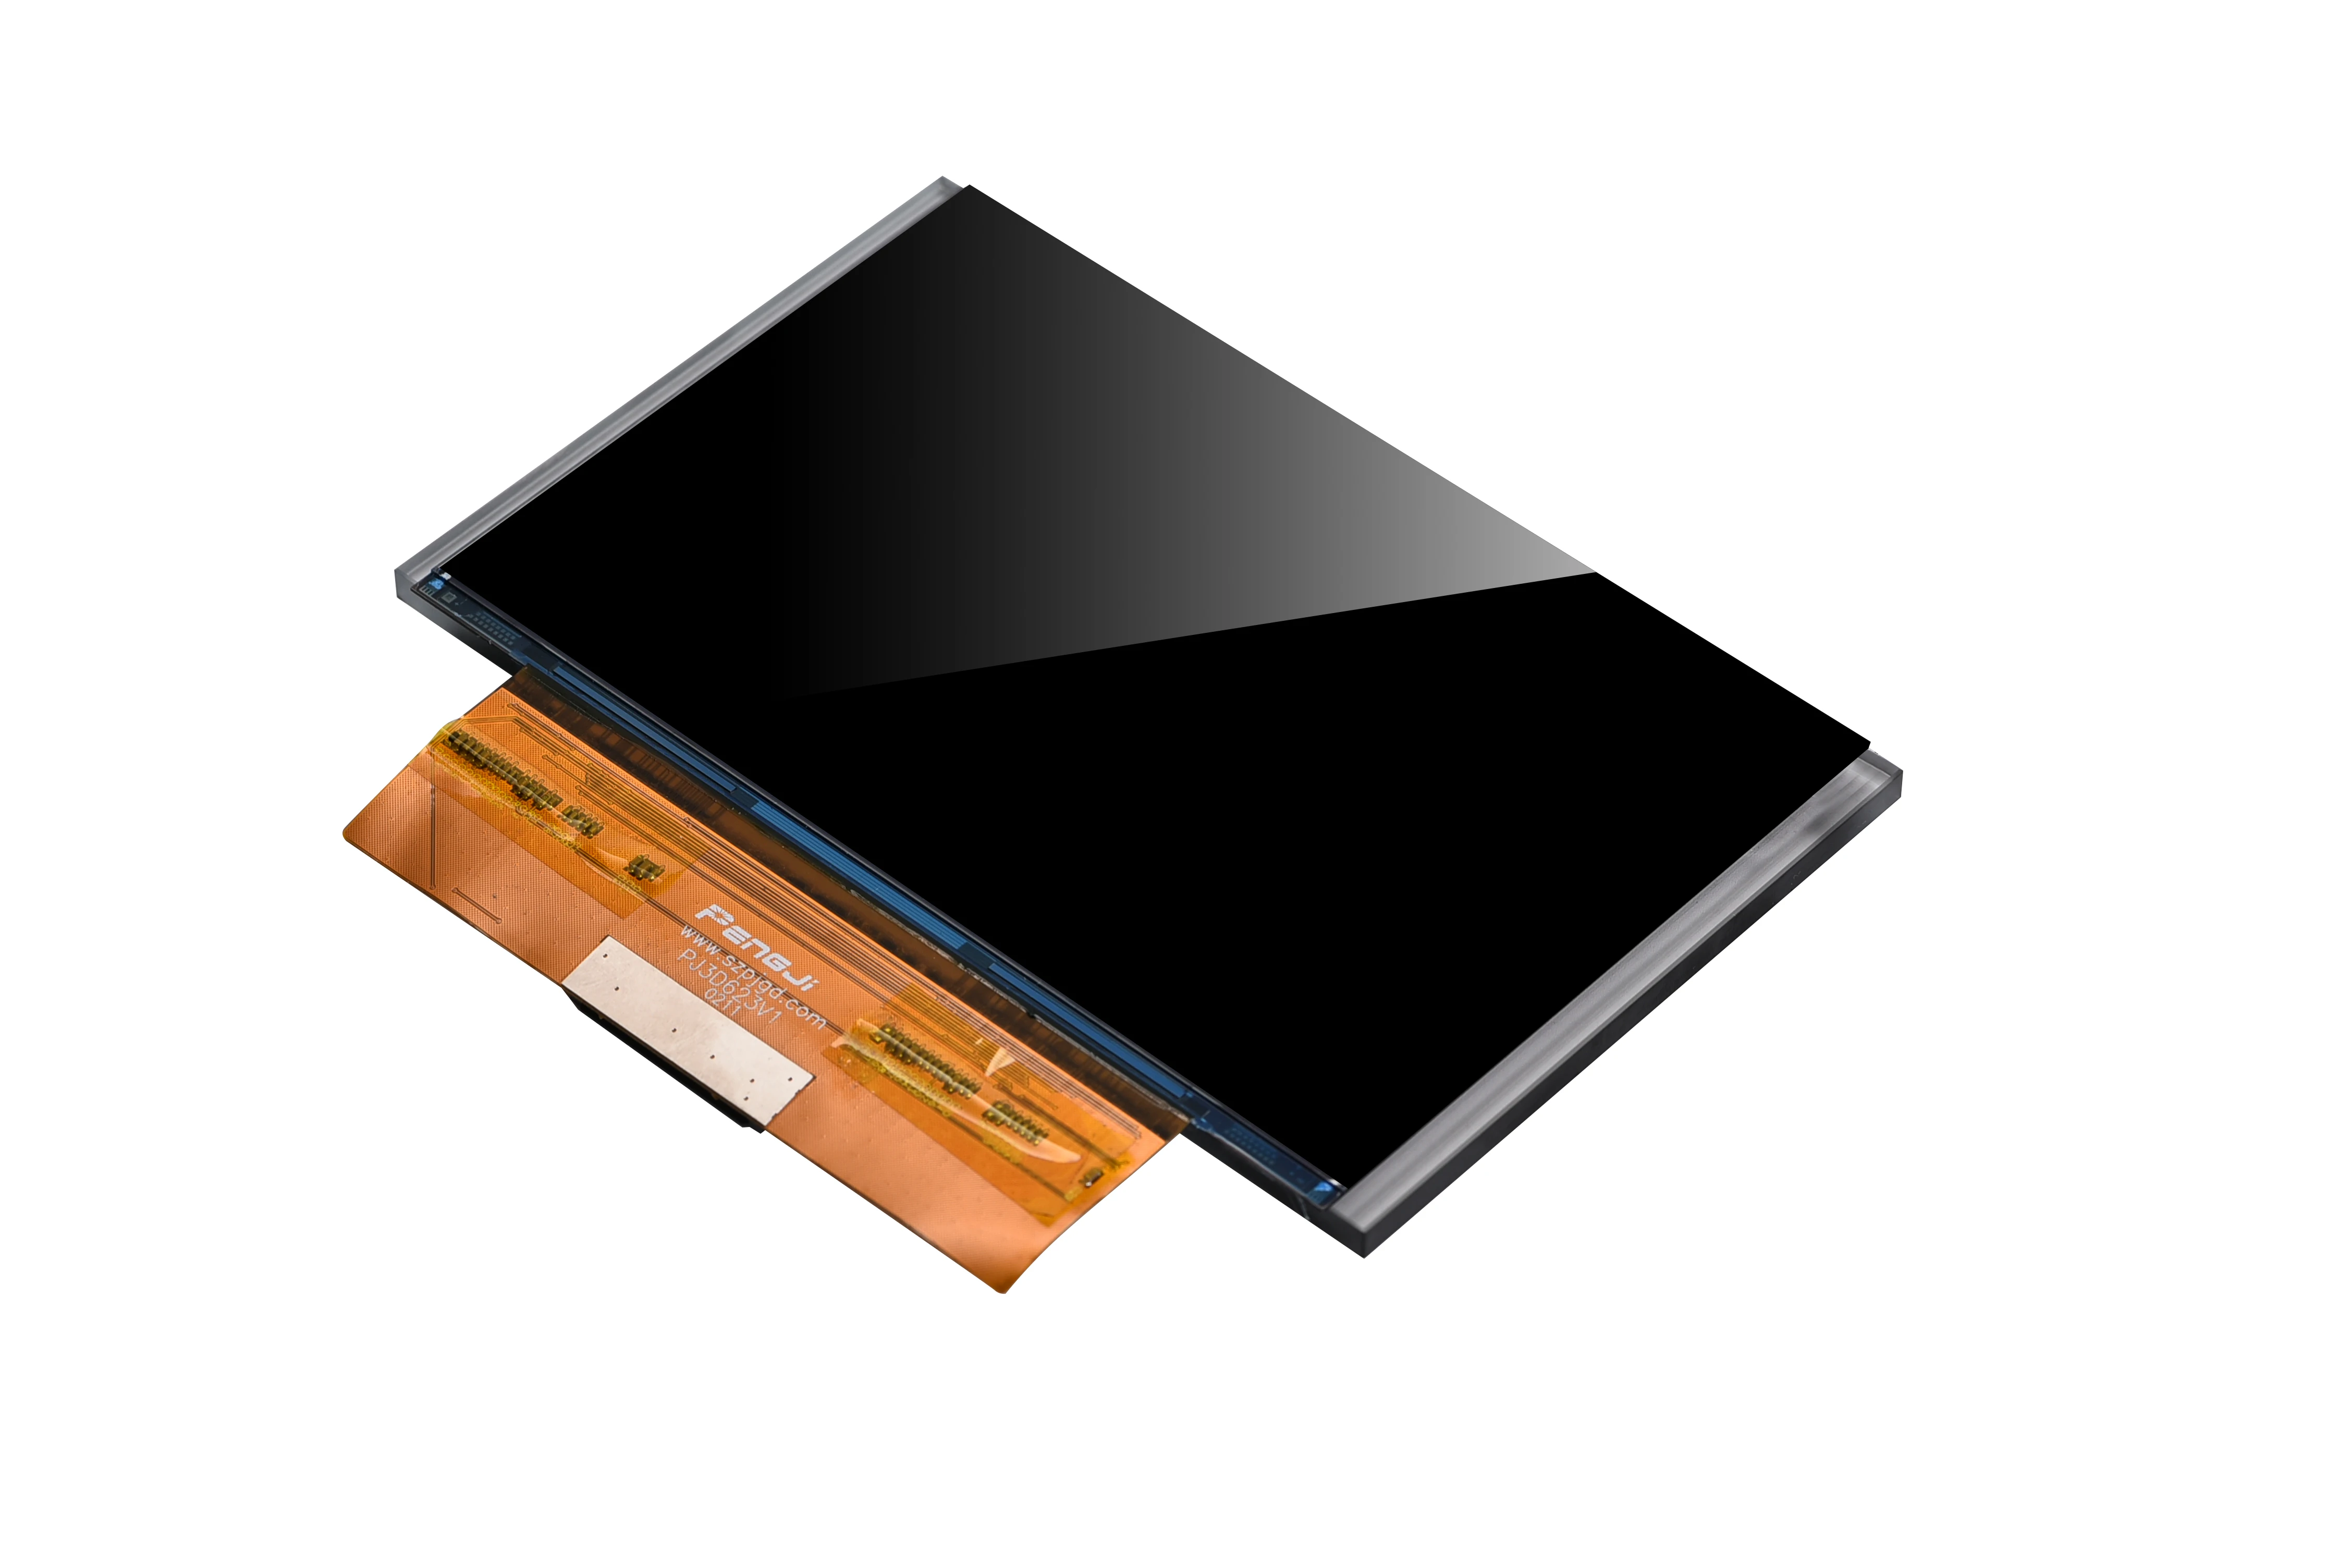 6.23 Inch 4k Mono LCD Display Screen with High Resolution 3840*2400 LCD Screen For 3D printer